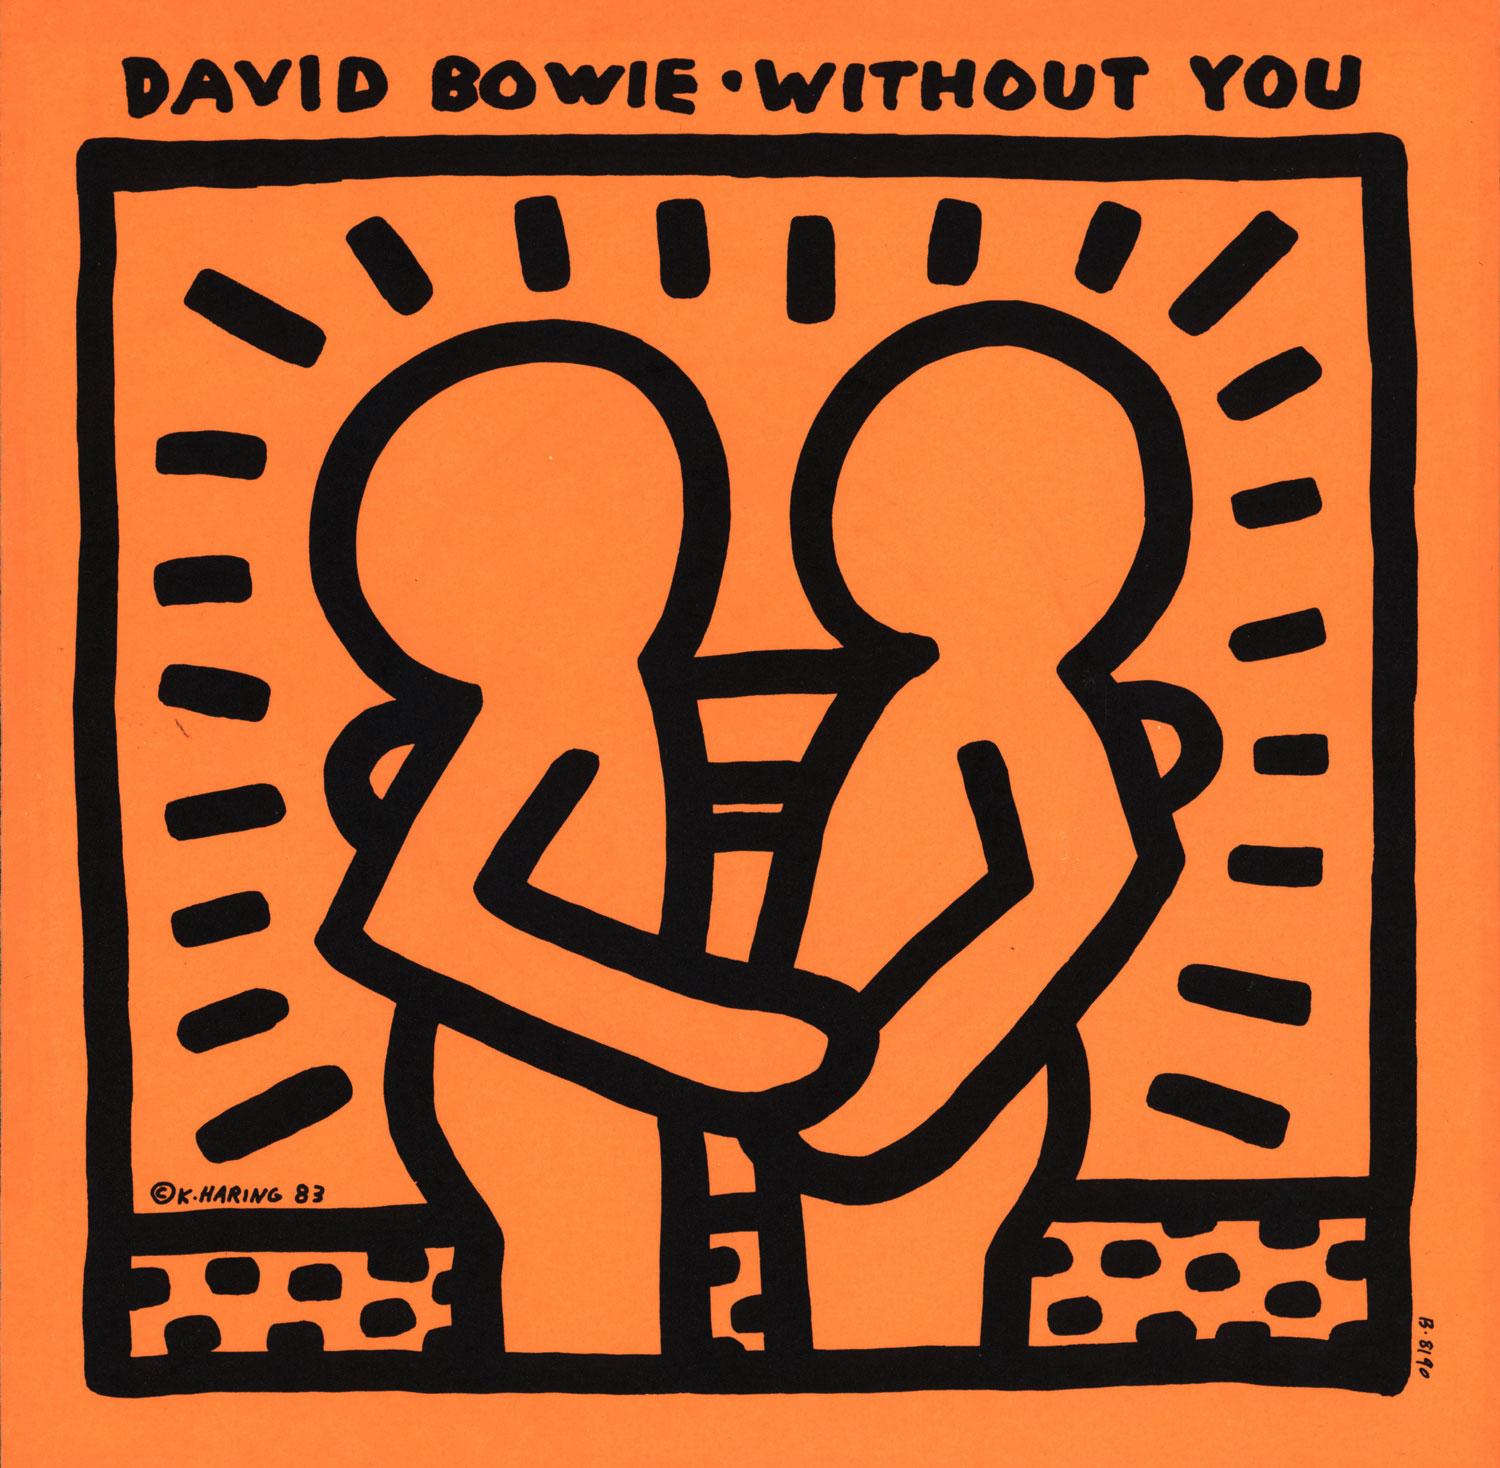 1980s Keith Haring Record Art:
David BOWIE "Without You" A Rare Highly Sought After Vinyl Art Cover featuring original cover artwork by Keith Haring. A fine  impression in very good overall vintage condition. 

Year: 1983.

Medium: Off-Set